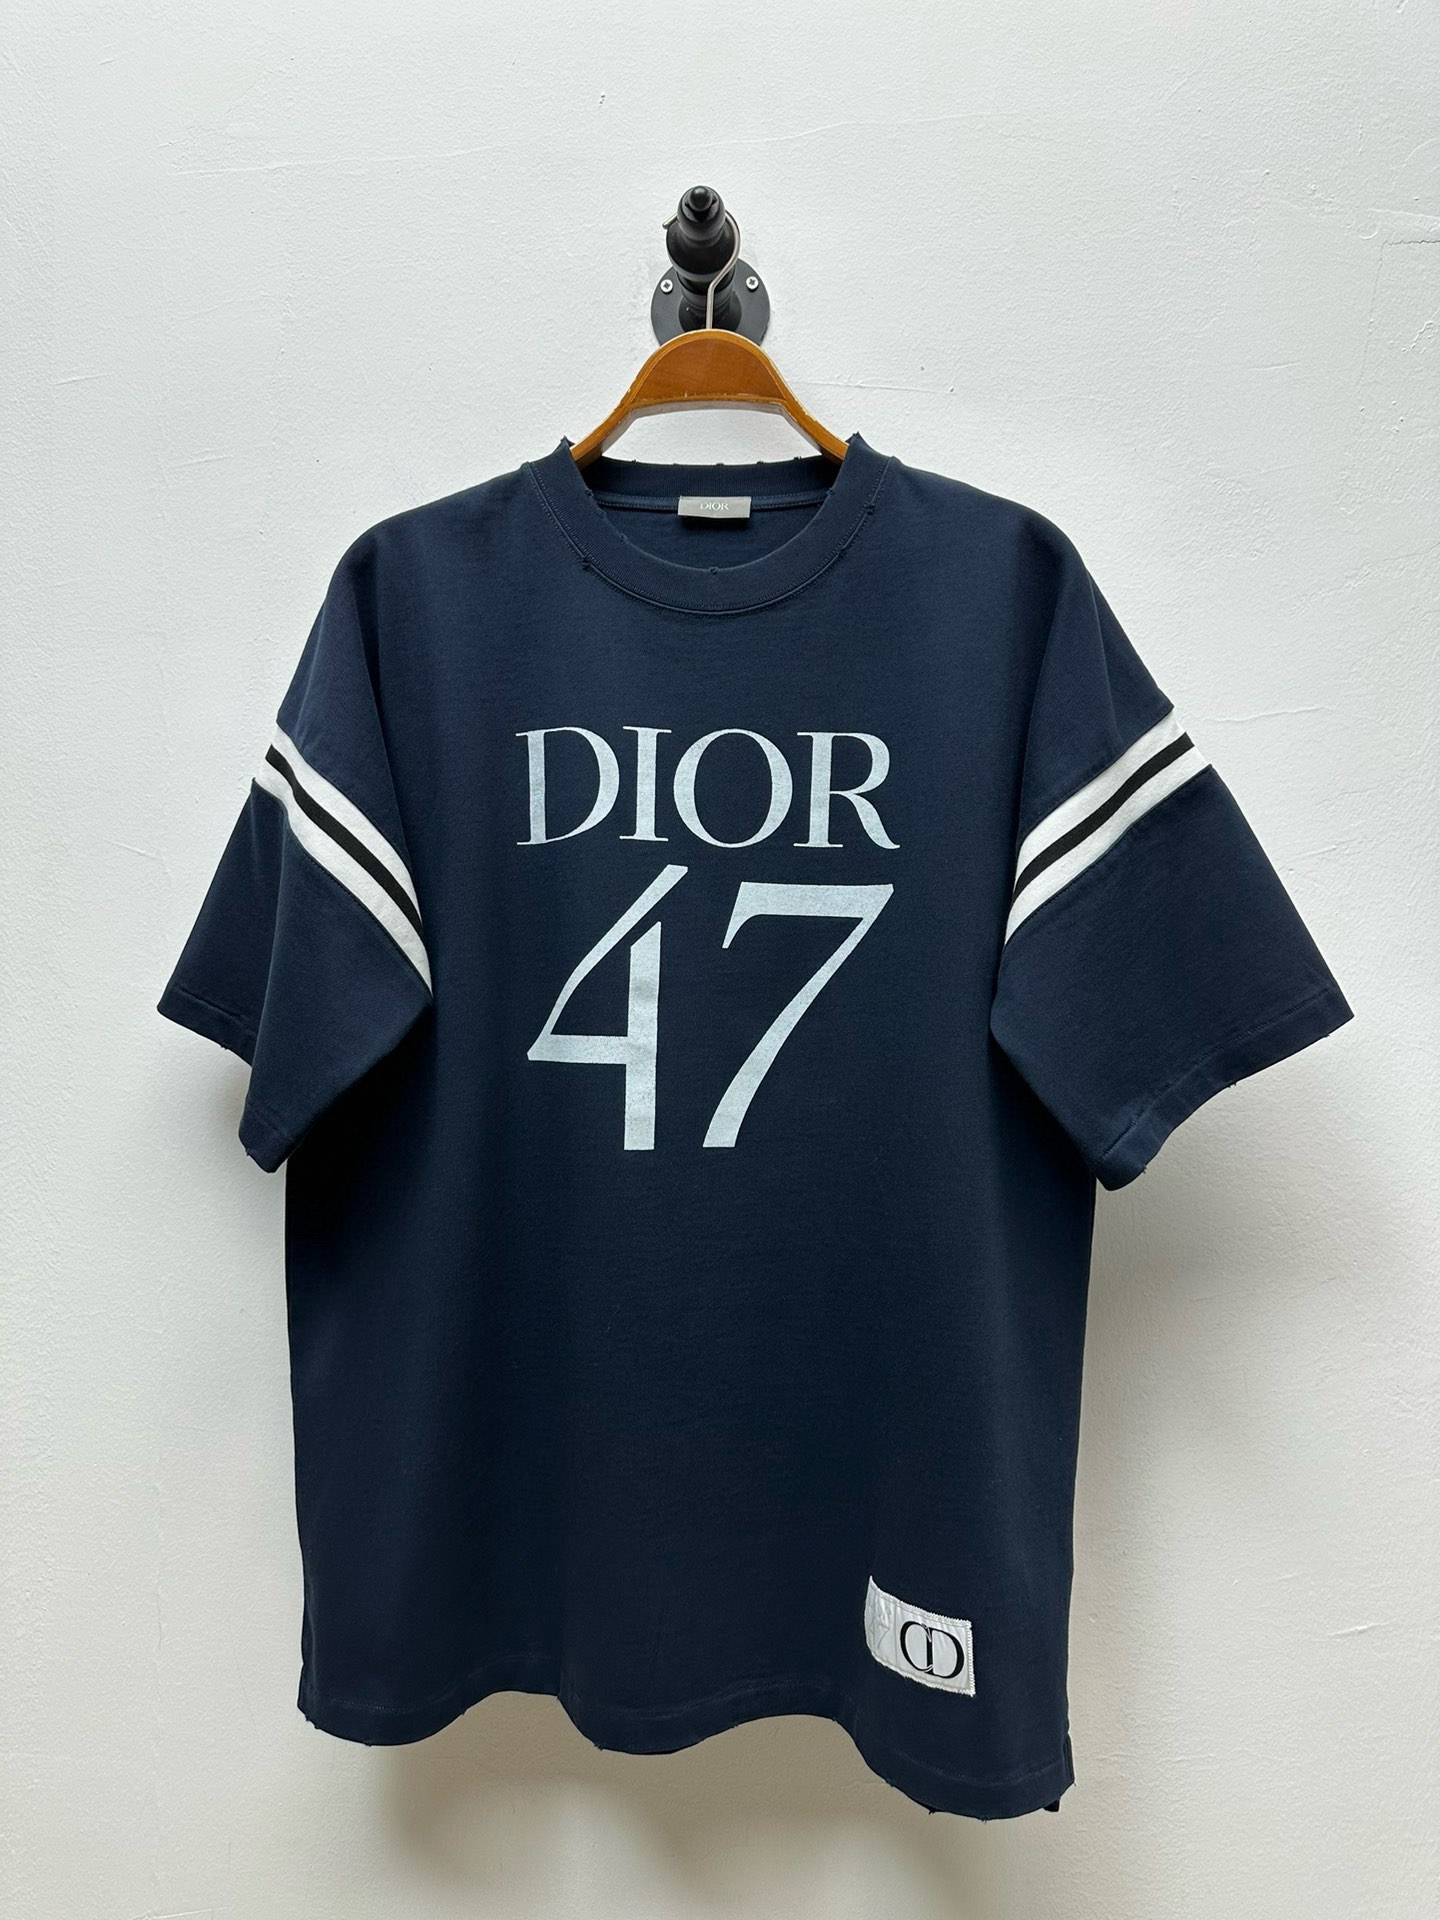 Dior Clothing T-Shirt White Printing Cotton Knitted Knitting 1947 Casual